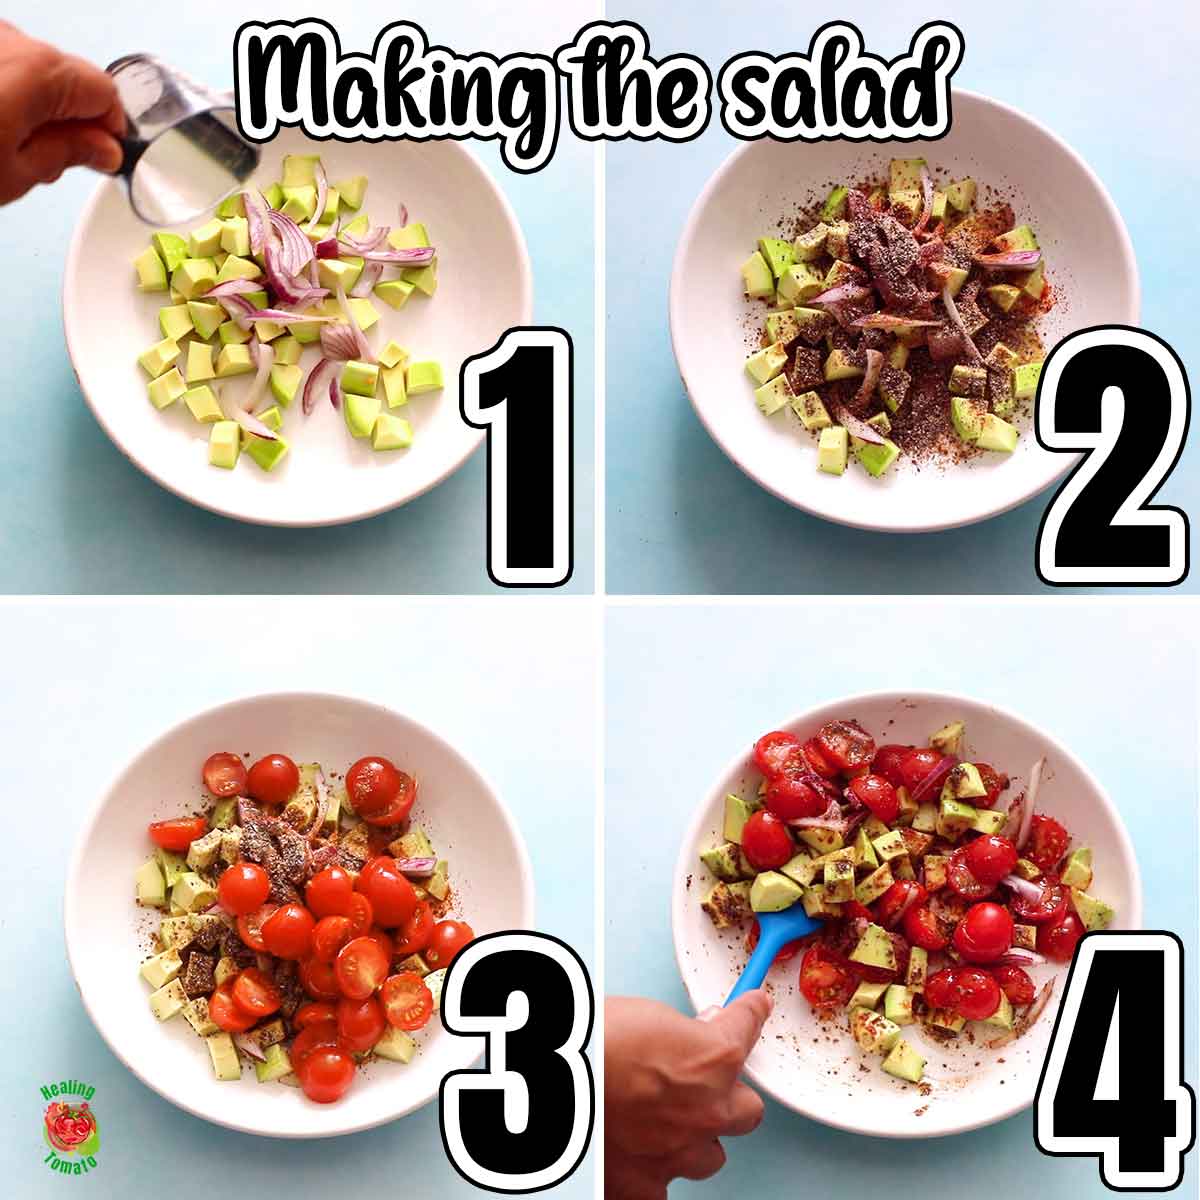 Collage of 4 images showing the steps needed tomake this avocado salad